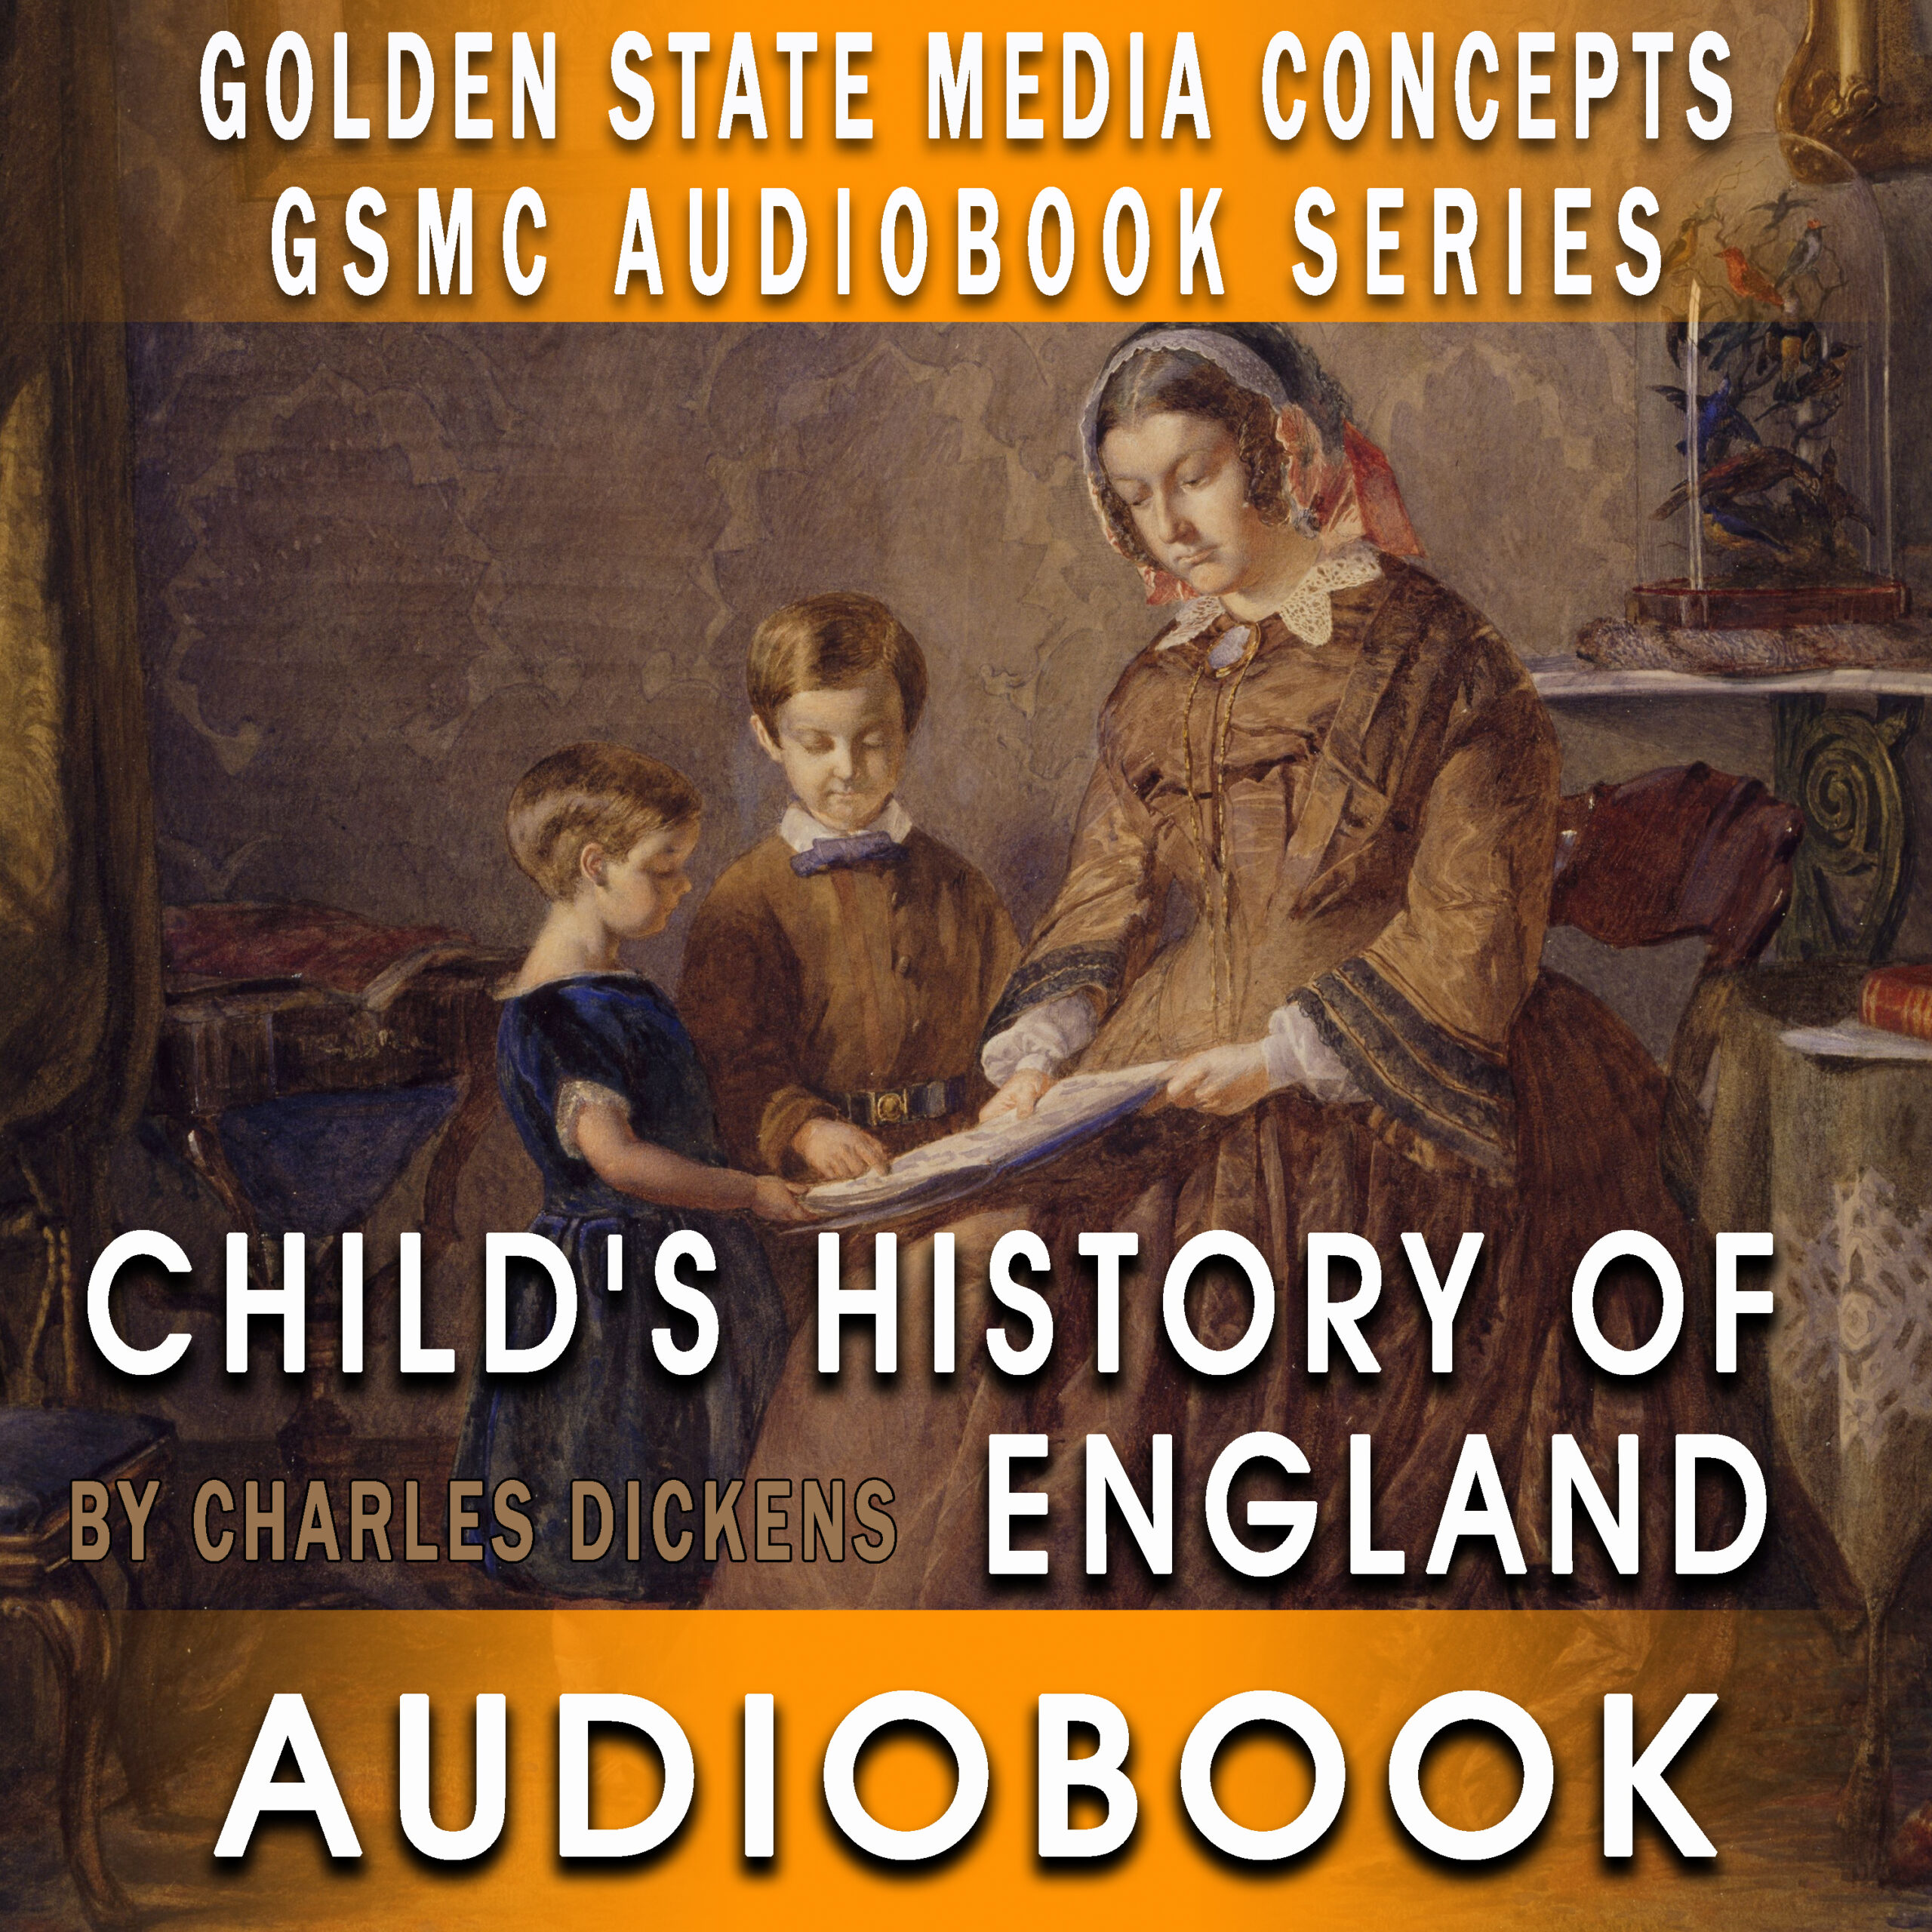 GSMC Audiobook Series: A Child's history of England